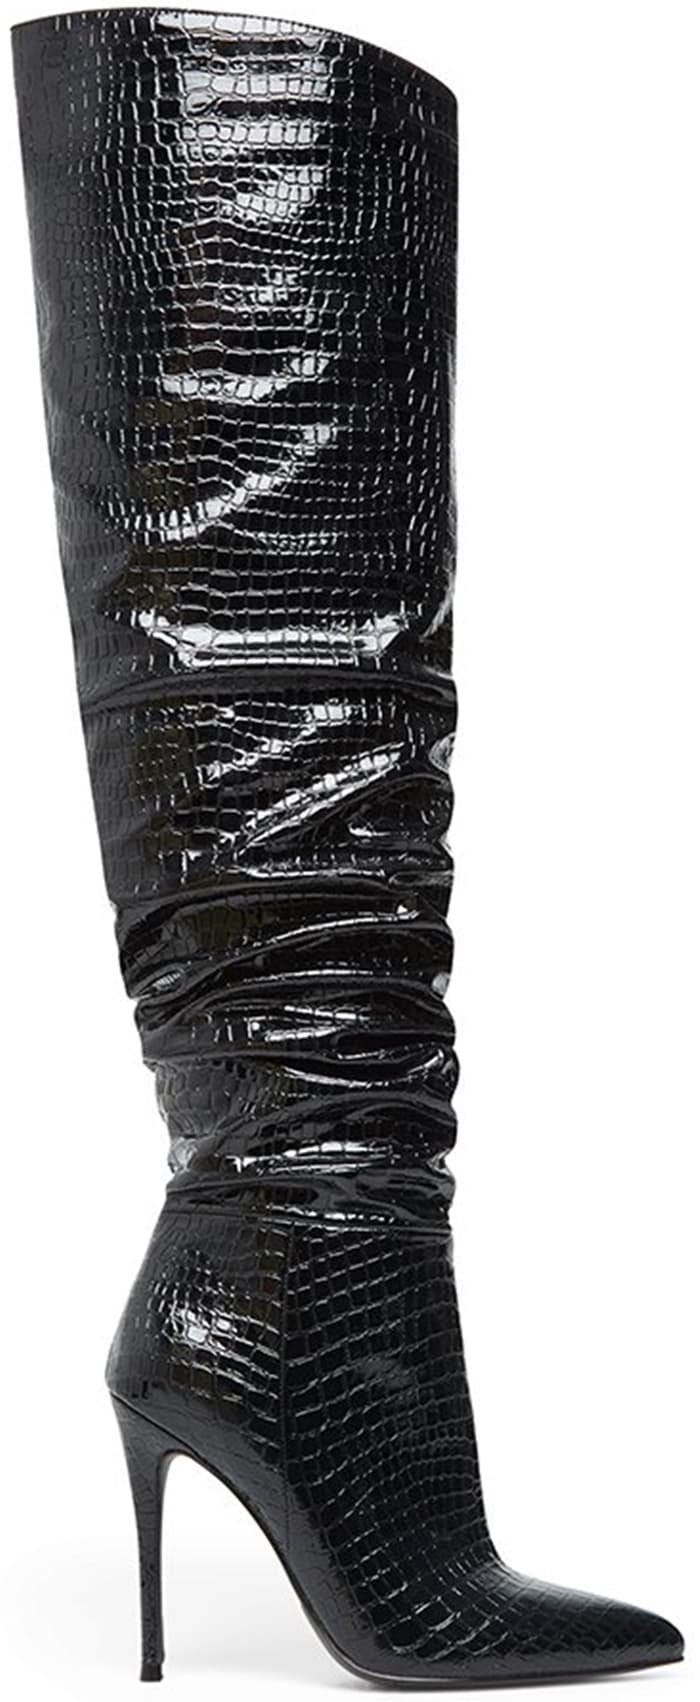 Black Harlow Reptile Embossed Over the Knee Boots